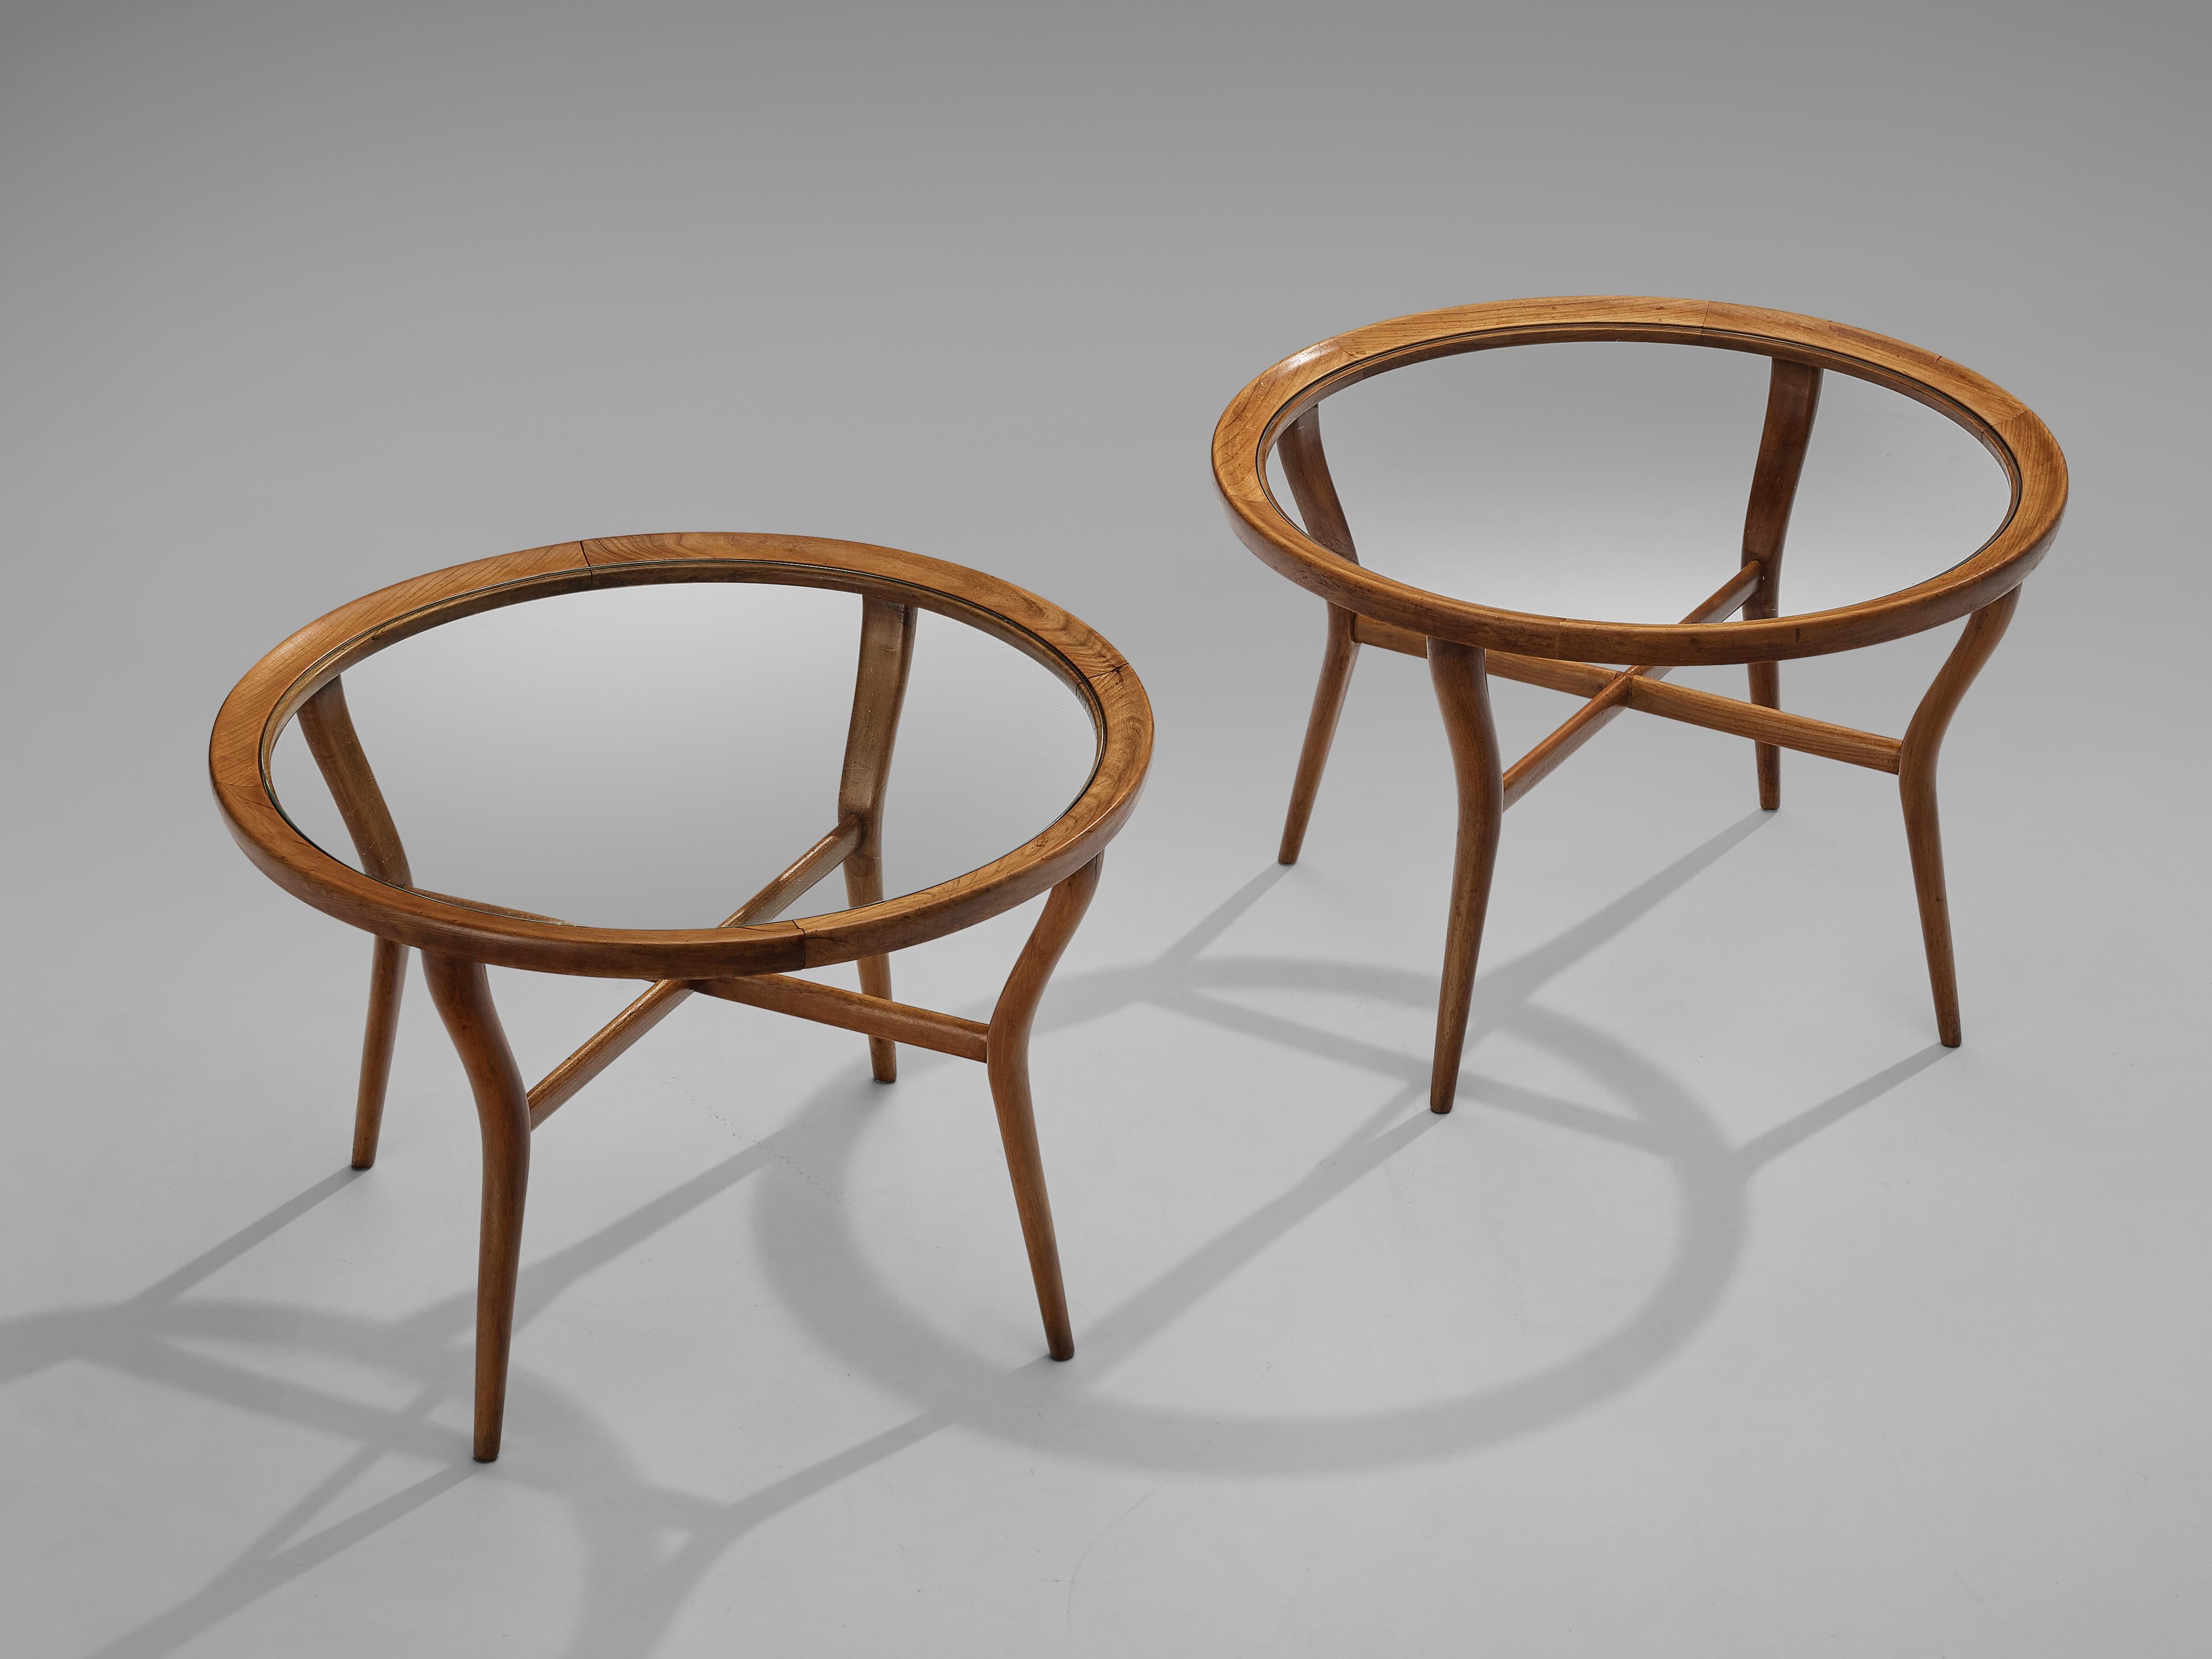 Coffee tables, cherrywood, glass, Italy, 1950s

Beautiful round Italian coffee tables in cherrywood and a glass tablet op. Although the design is simplistic, due to the combination of materials the piece still has a great character. Thanks to the